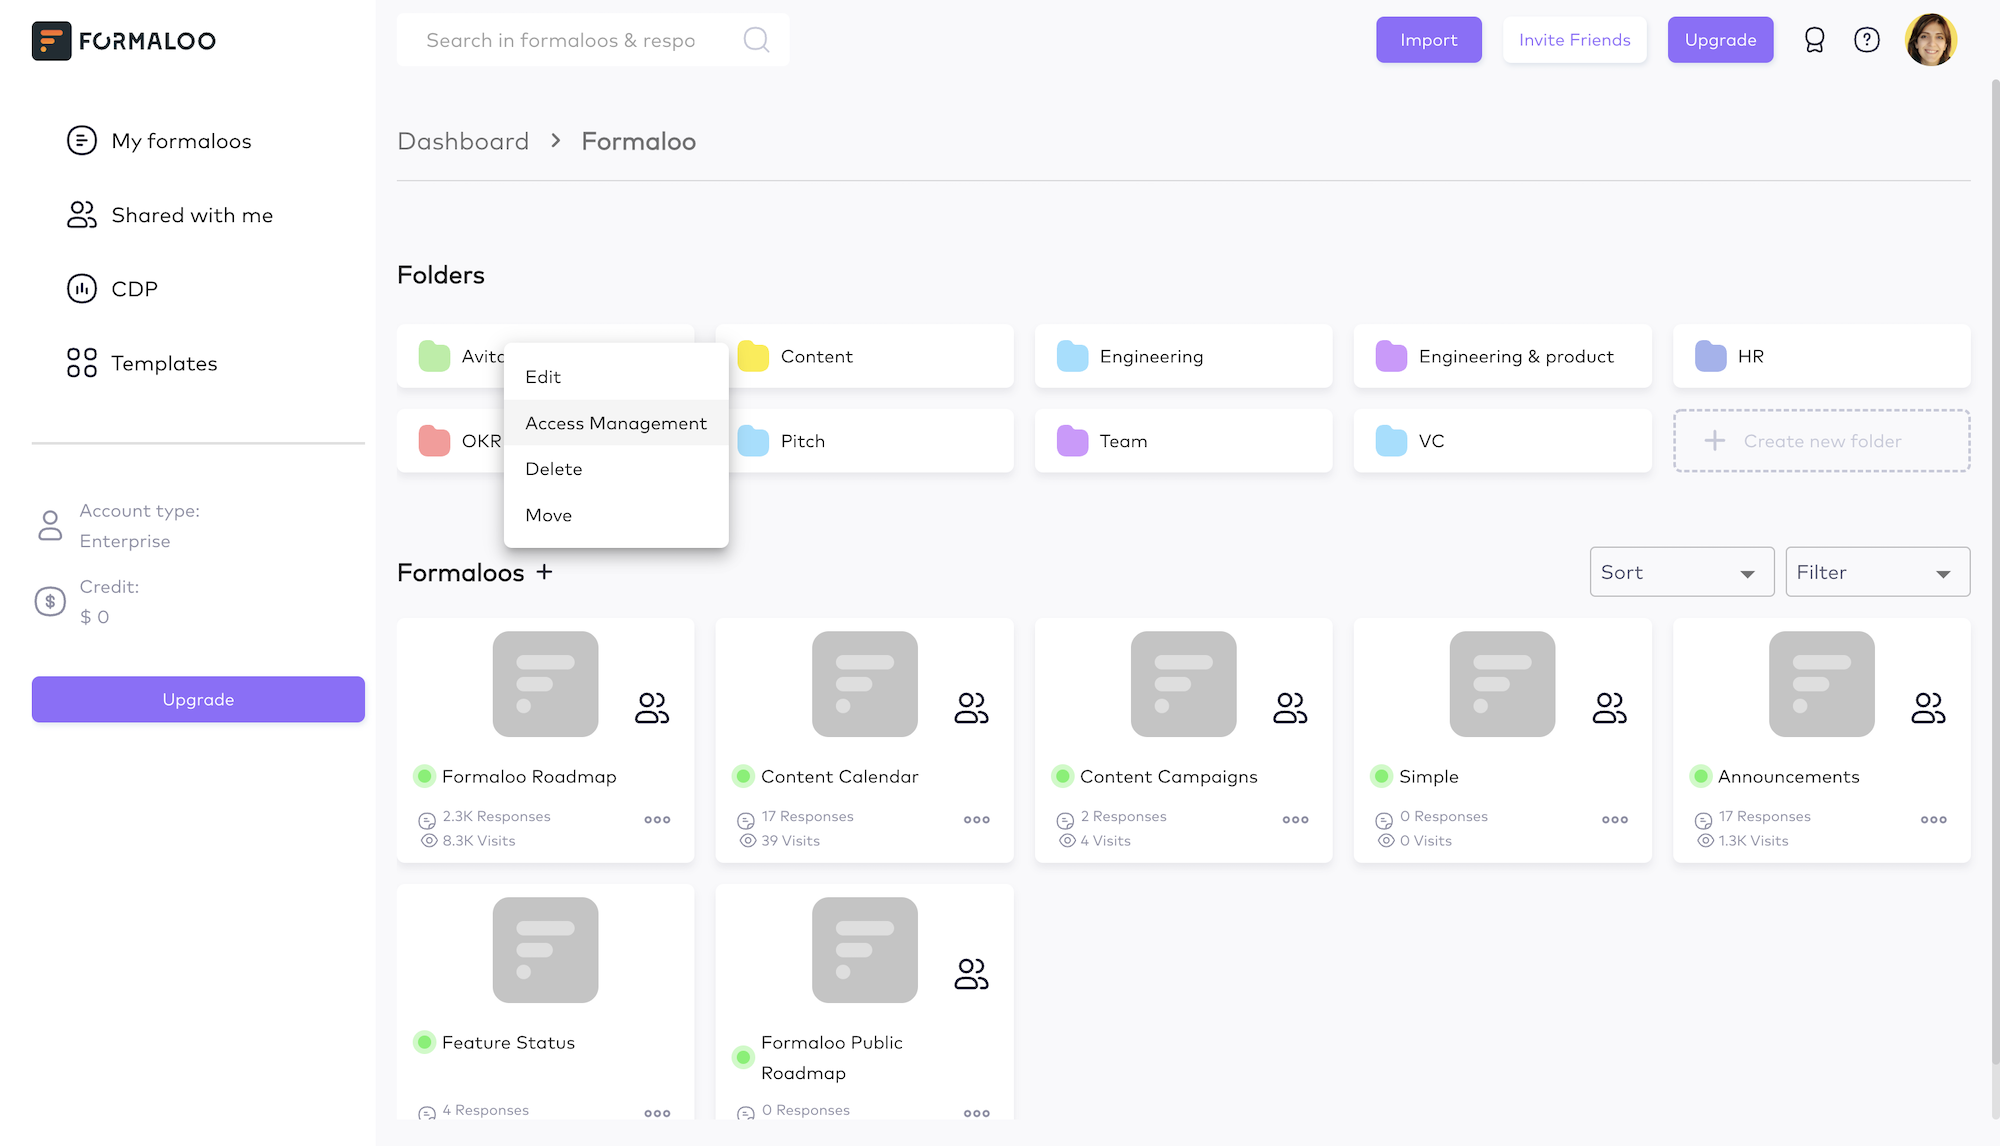 Formaloo Software - Organize your formaloos with folders and manage your team's access